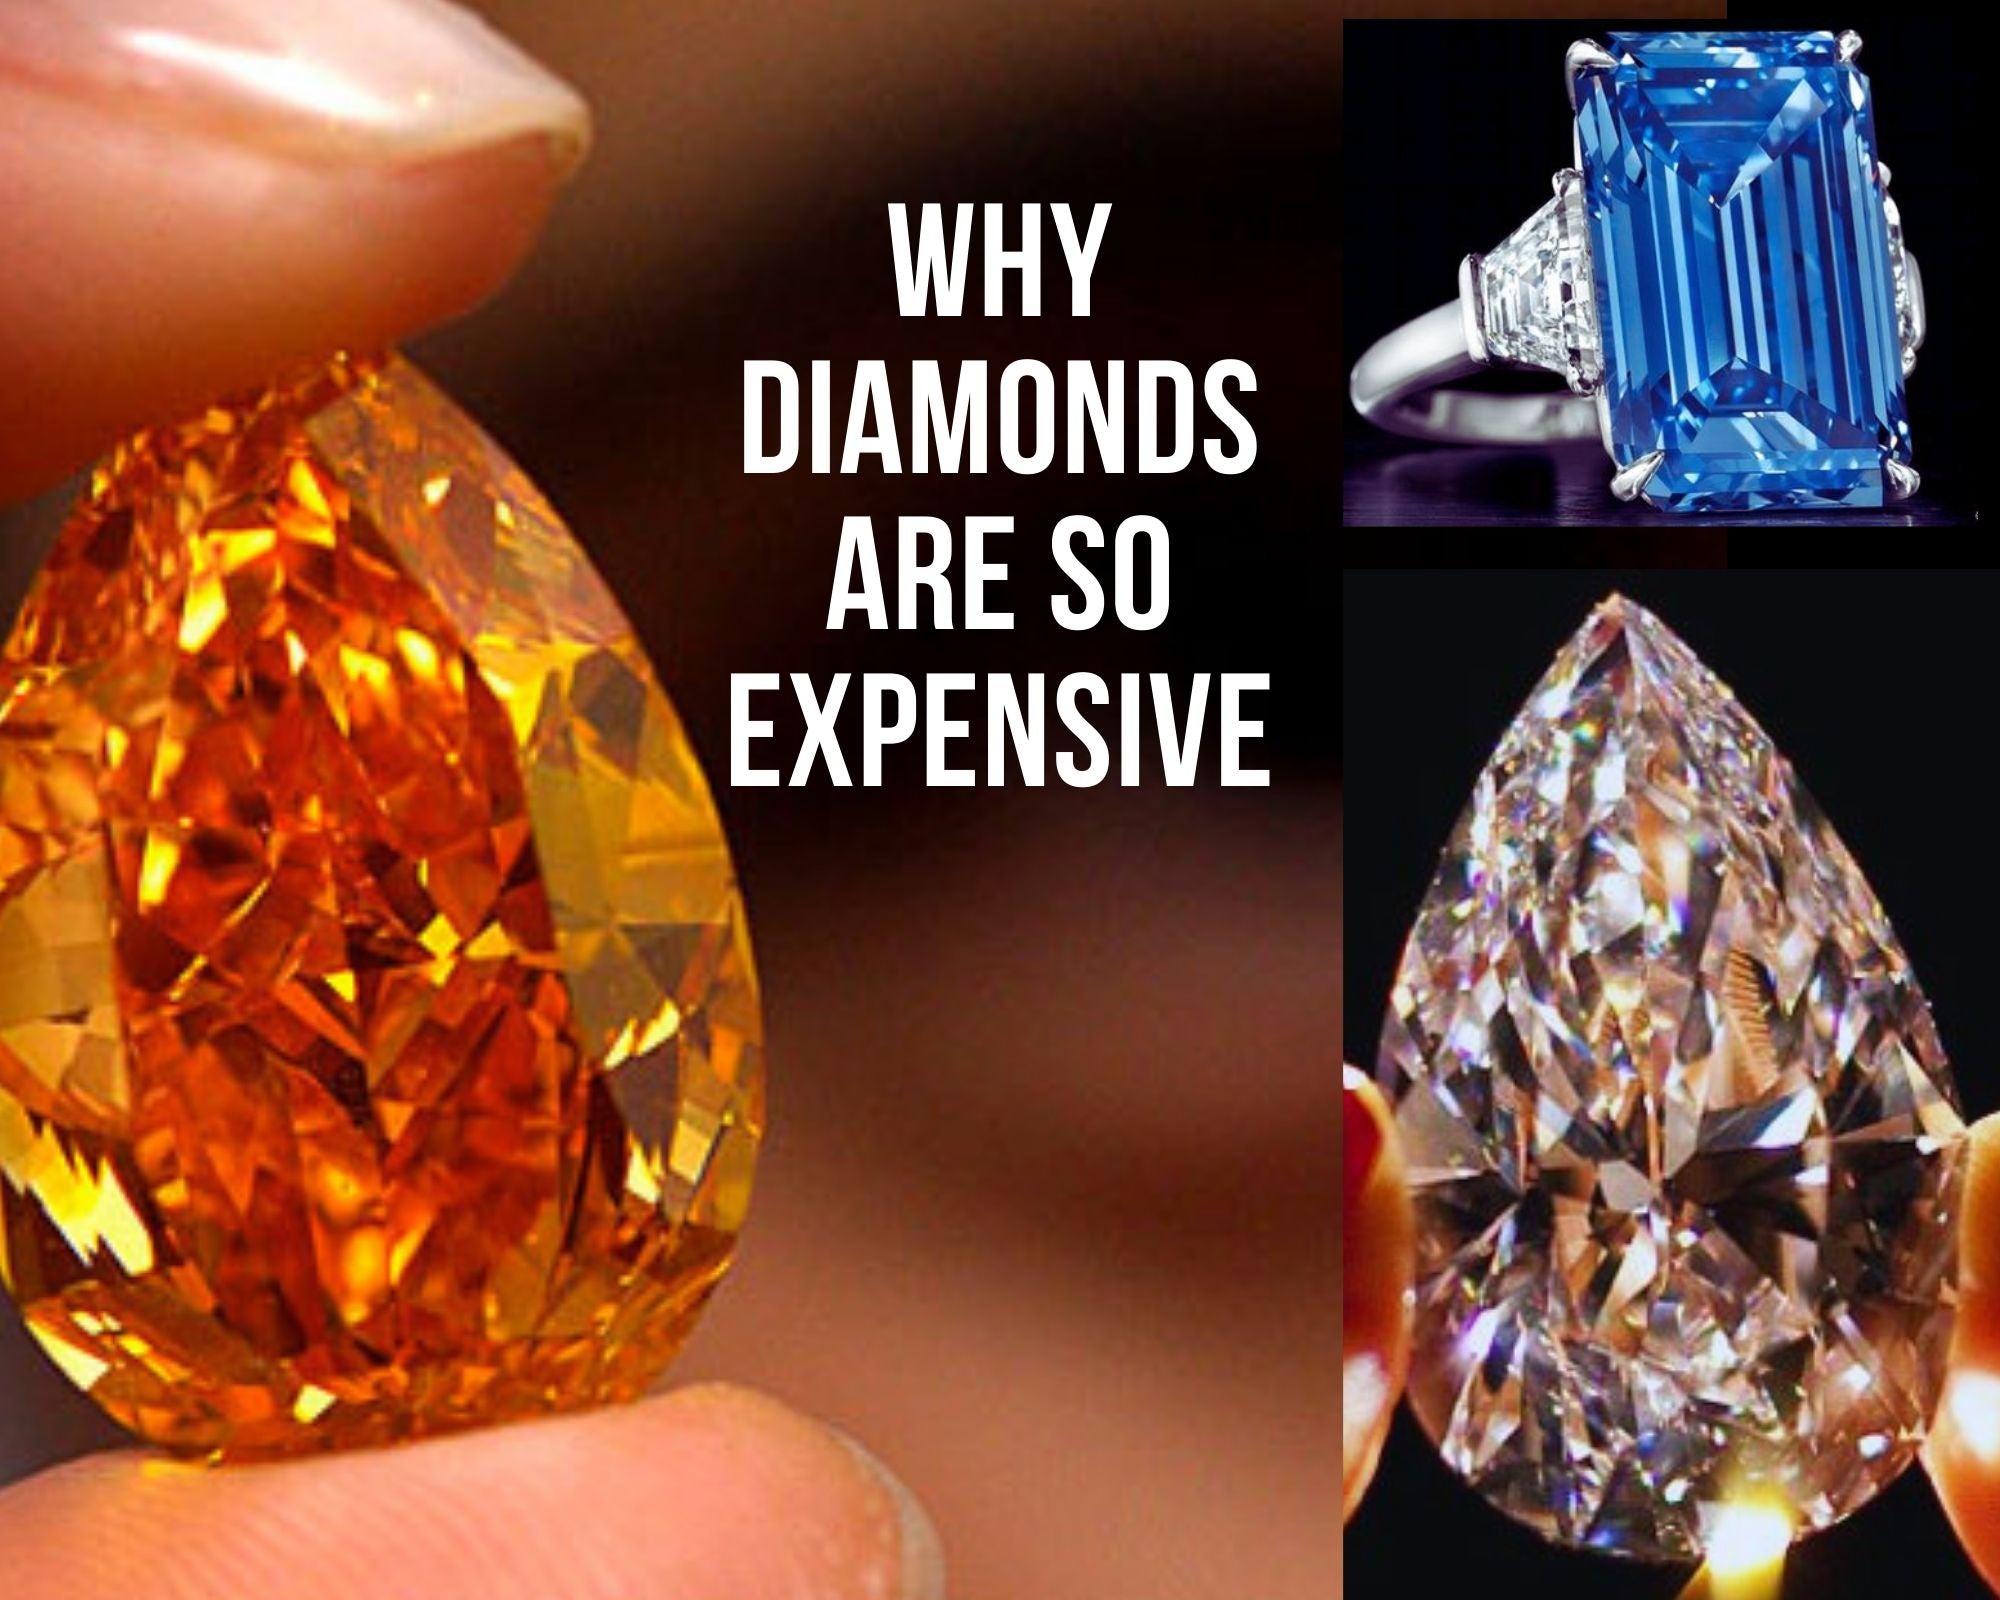 Diamonds are expensive but why?